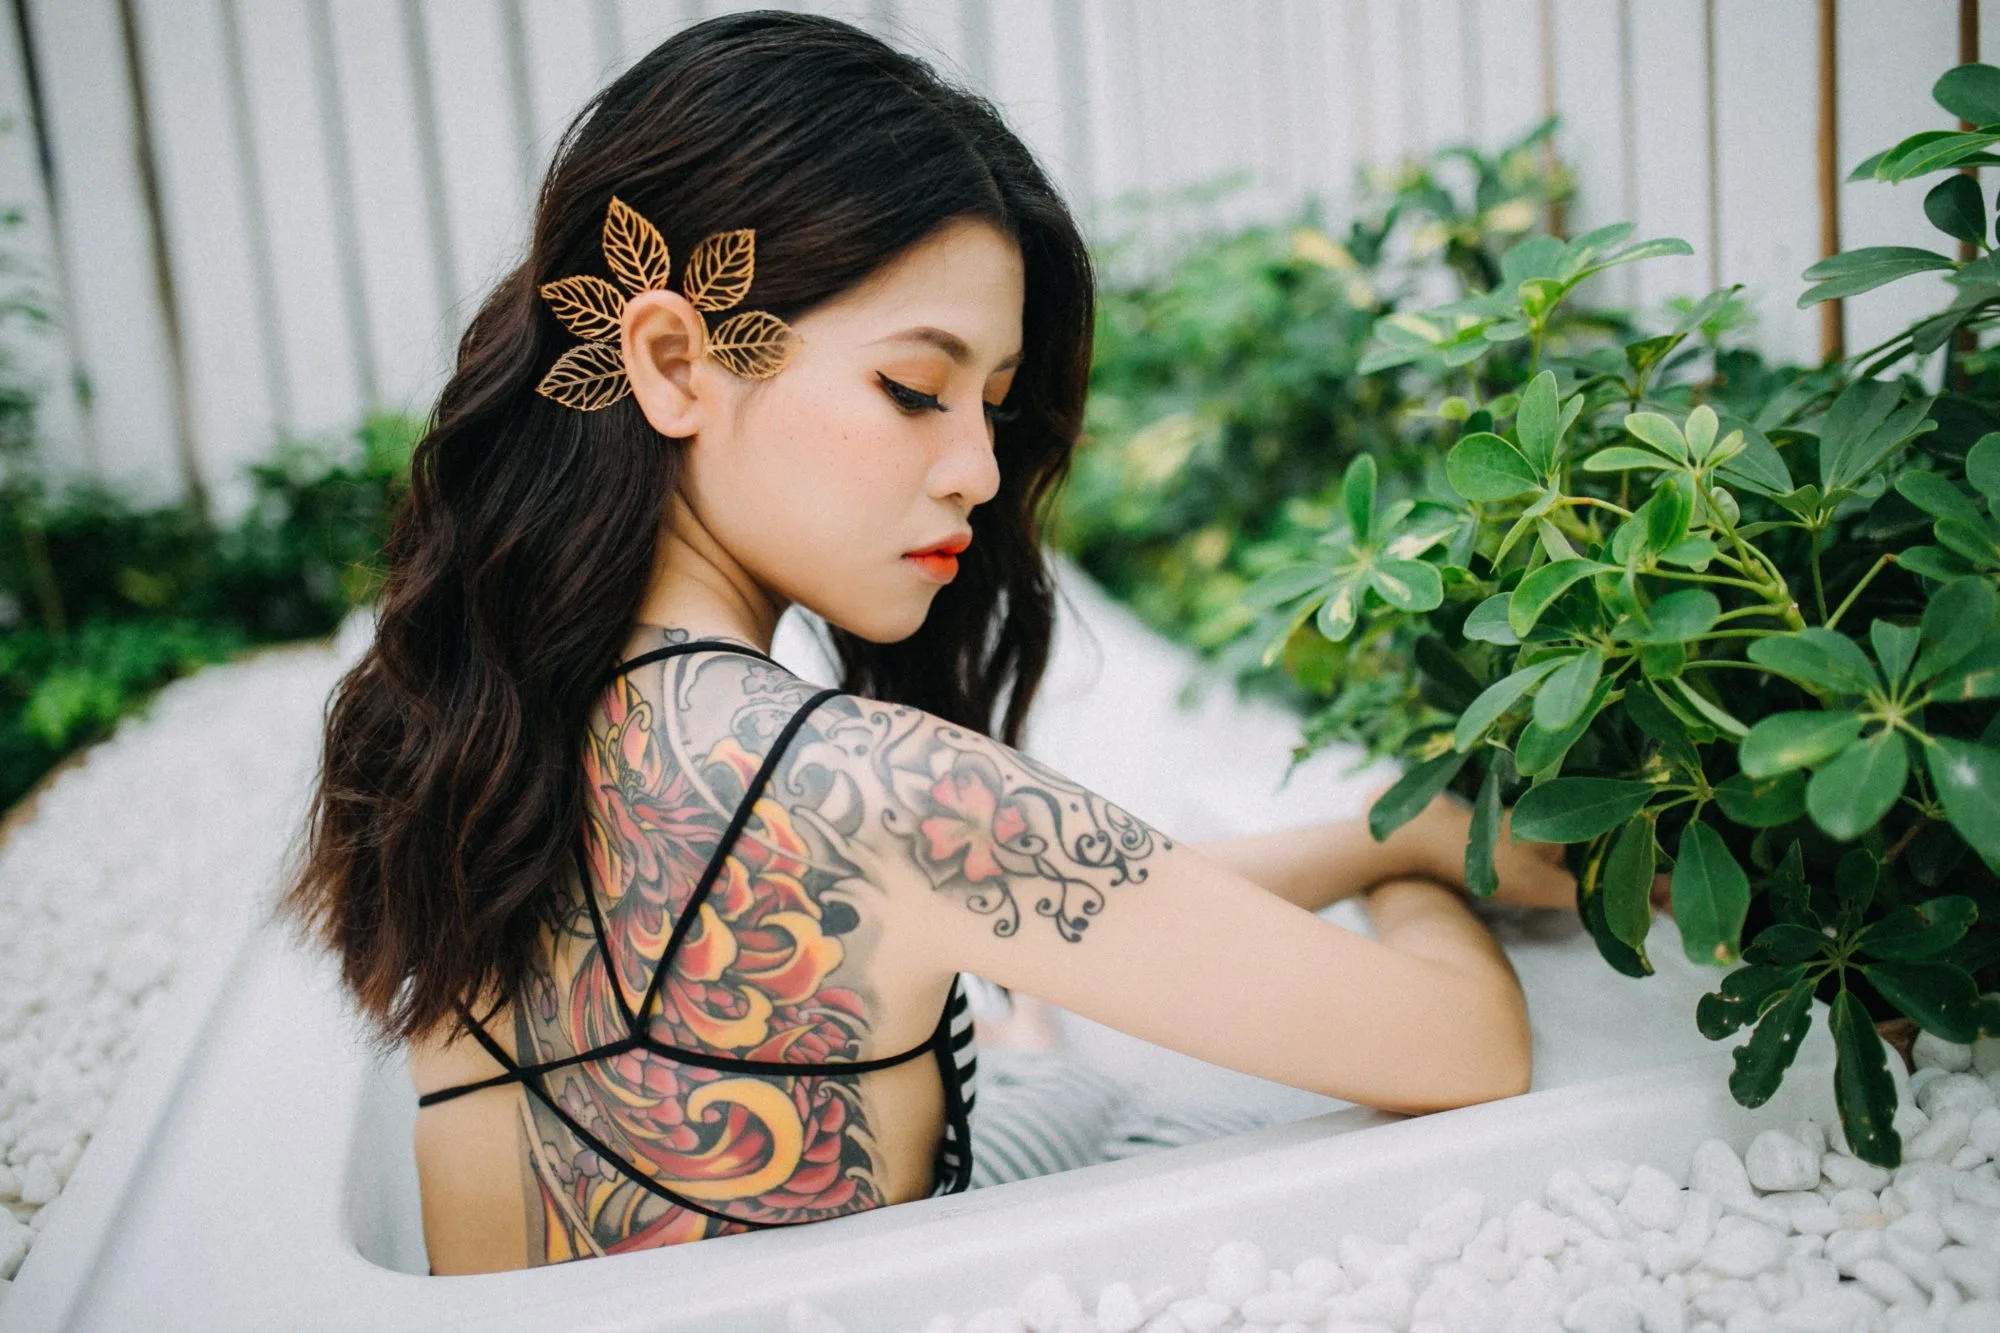 Your Colourful New Tattoo May Be Affecting Your Lymphatic System